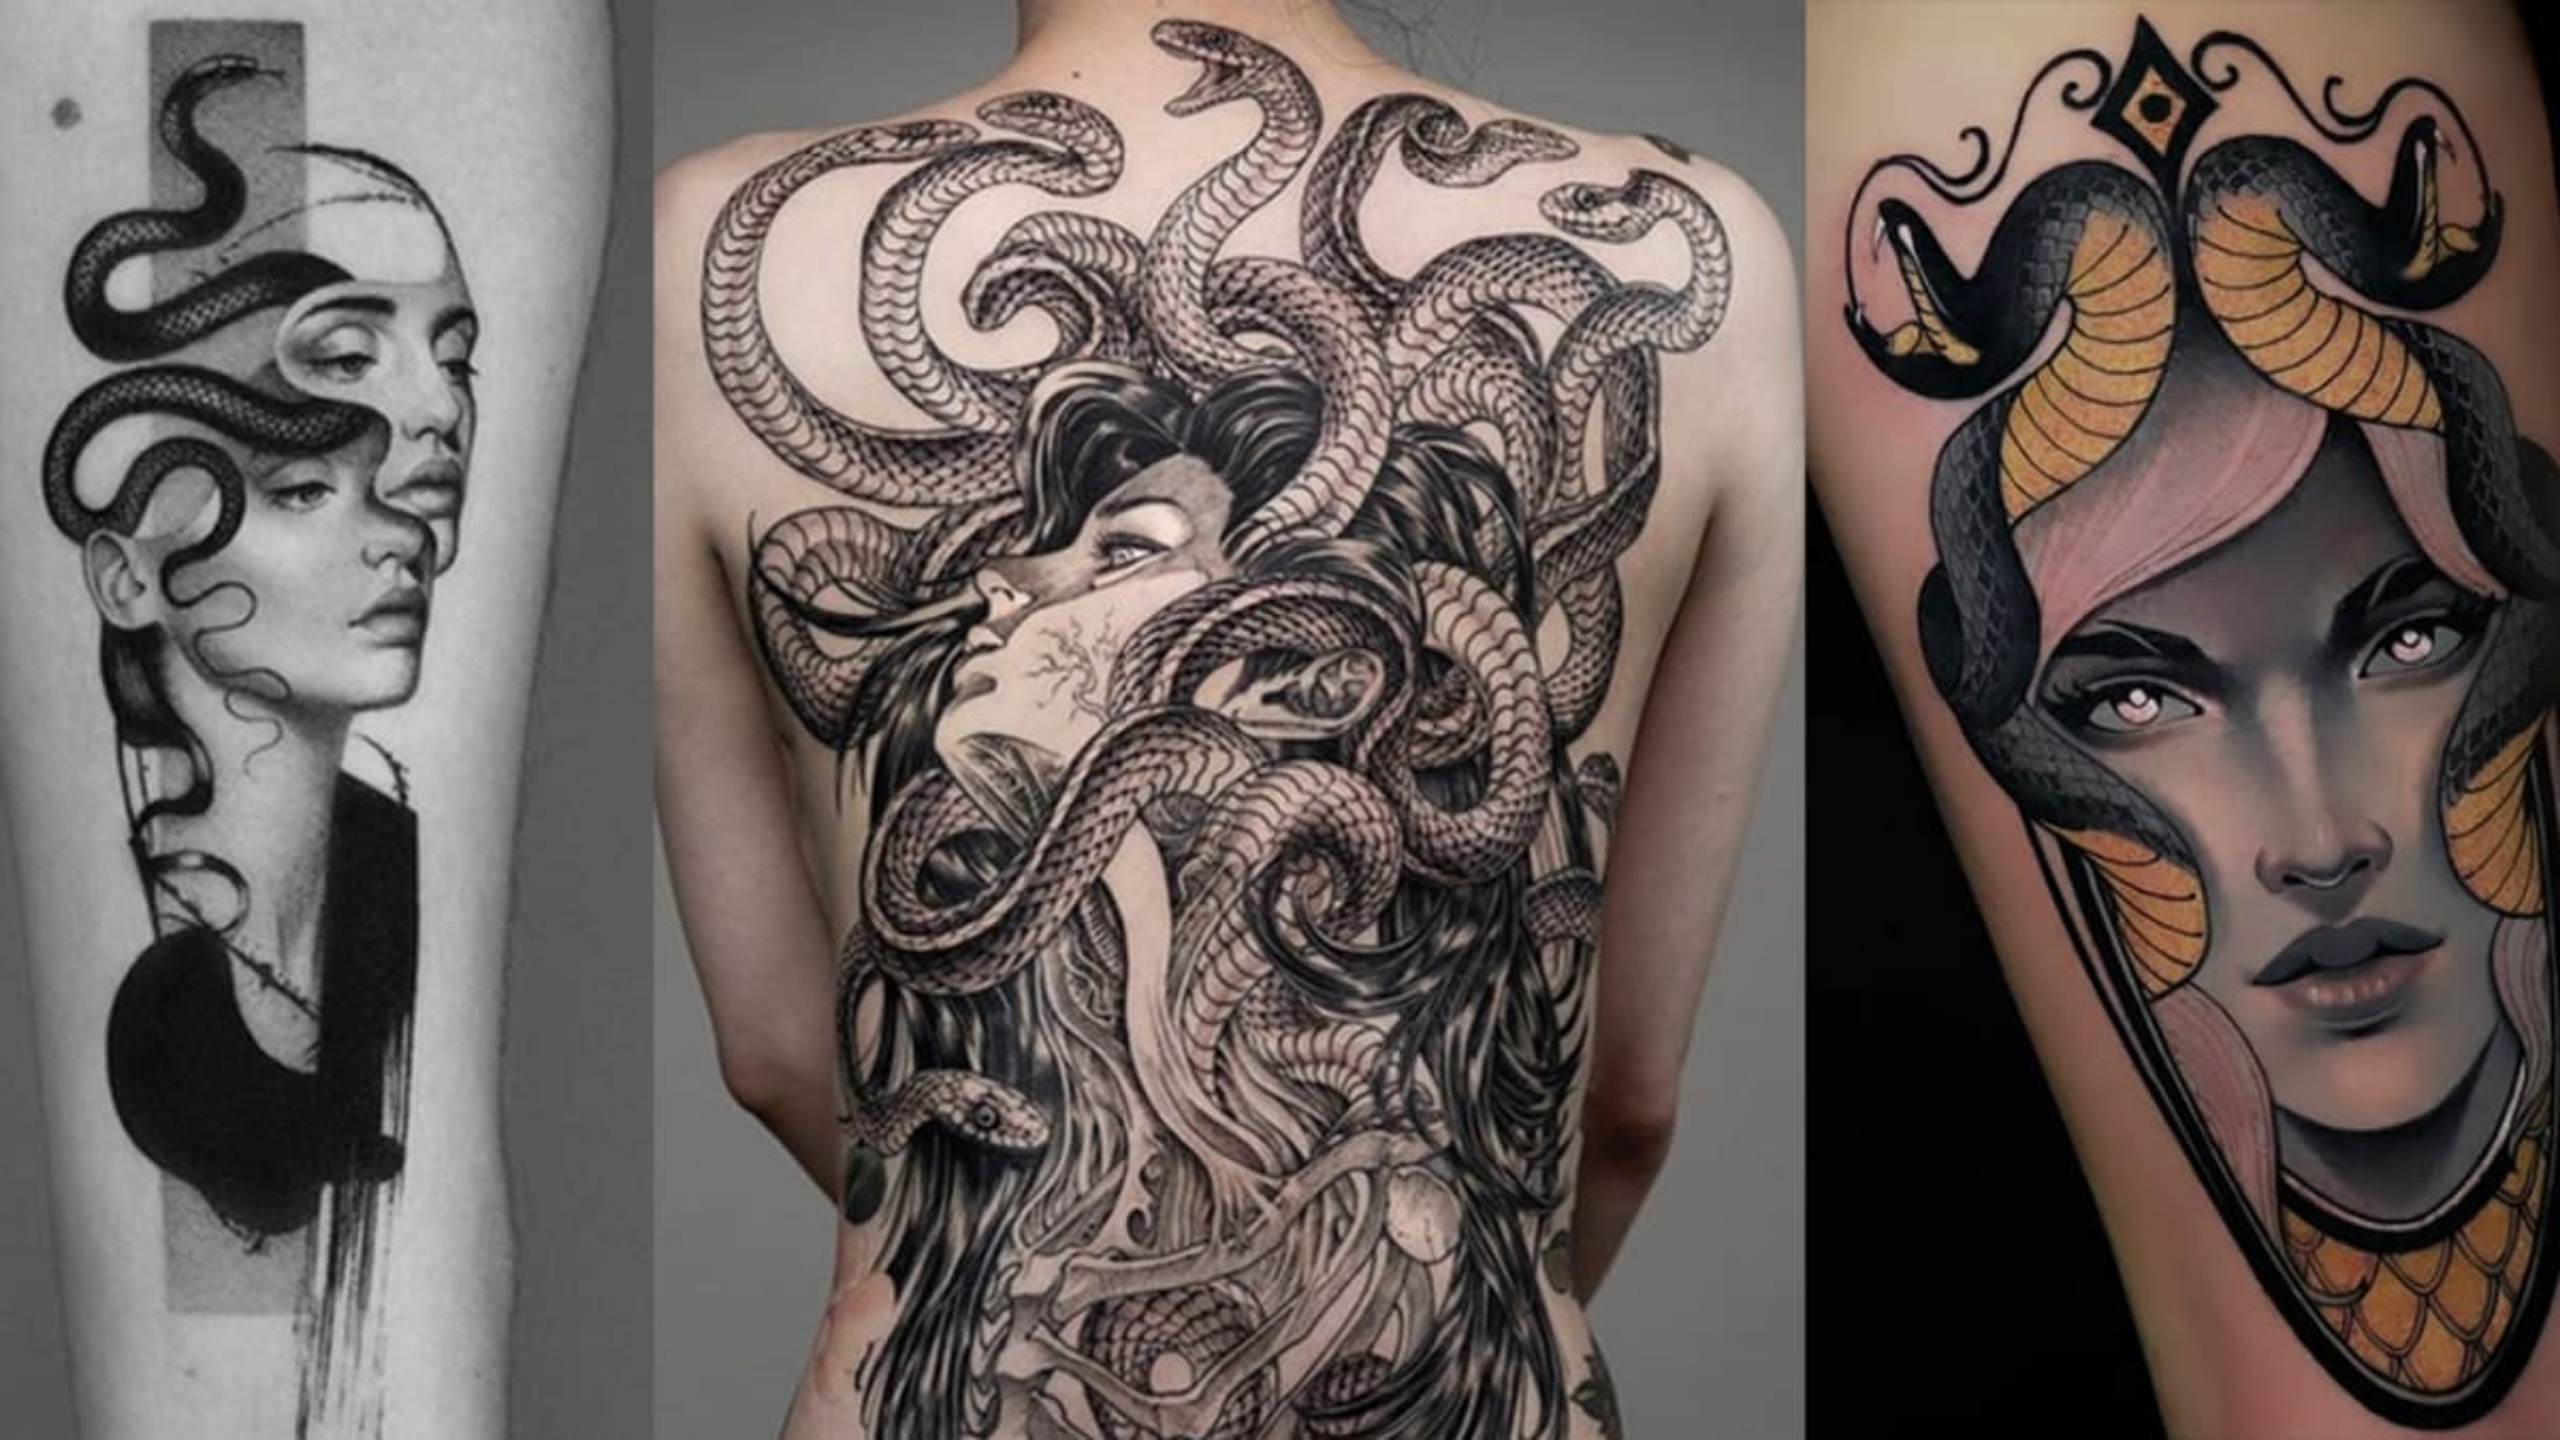 Bring The Classic Greek Medusa Tattoo Ideas to Amp Up Your Aesthetic – 27 Designs